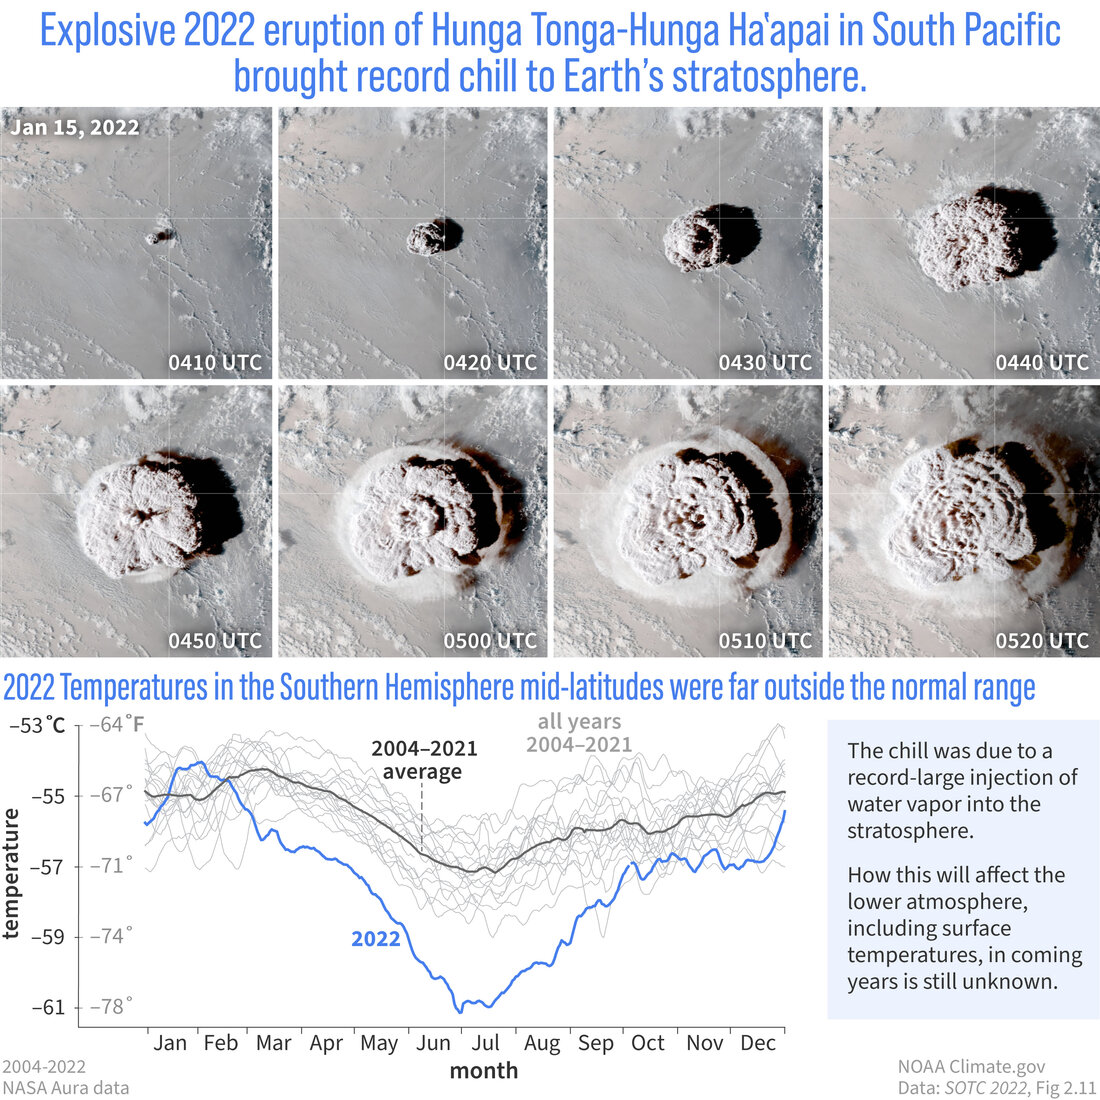 Infographic showing series of small satellite images of volcanic eruption and a line graph of the cooling impact on the stratosphere